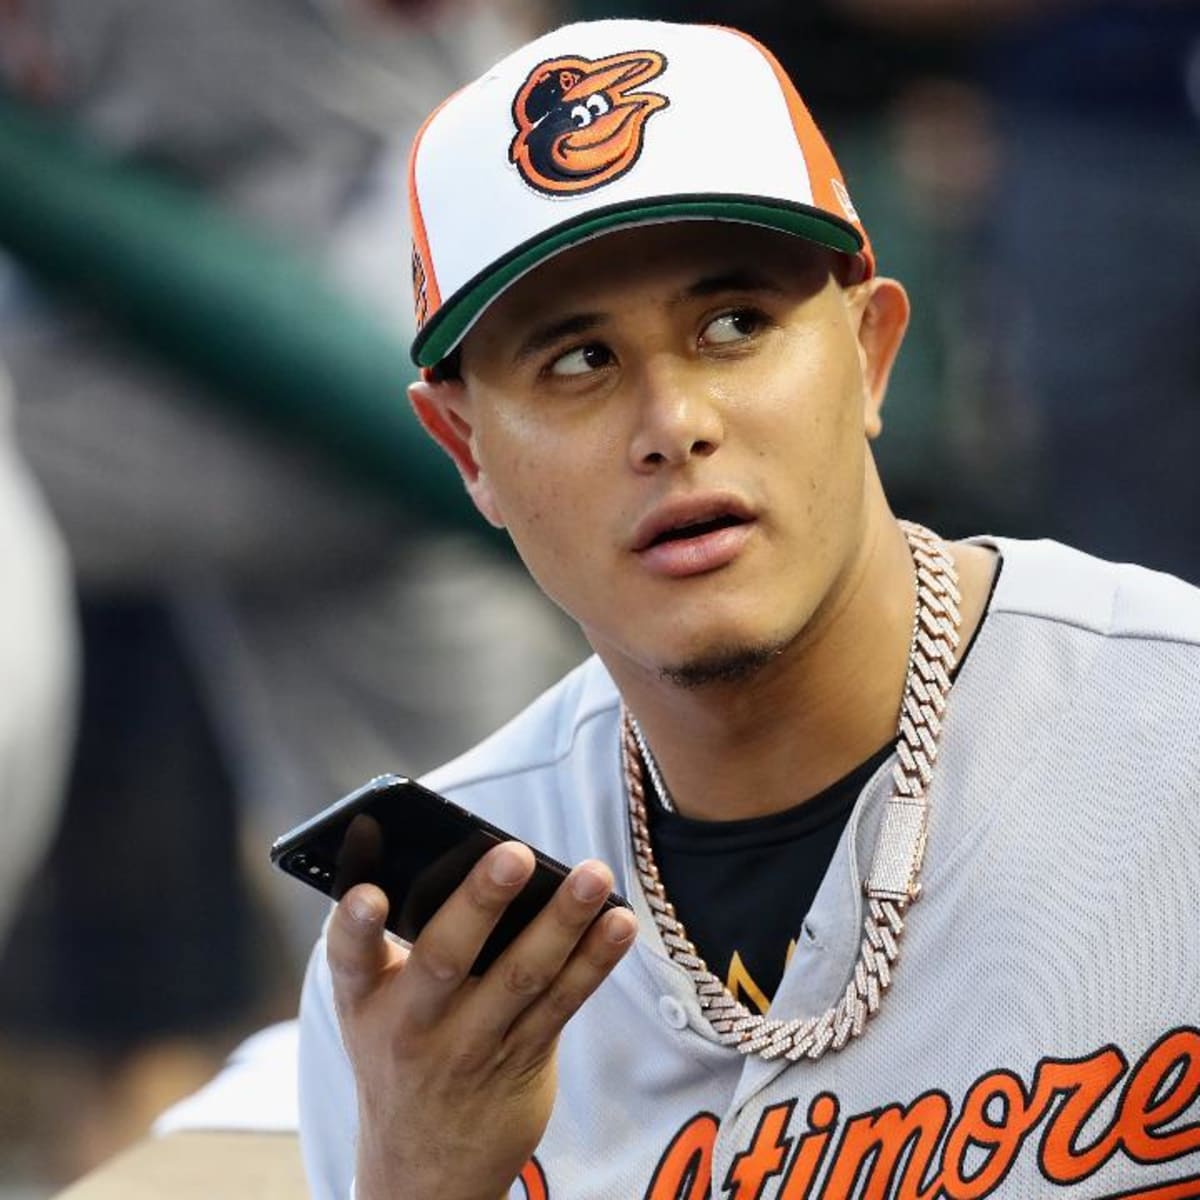 Manny Machado trade to Dodgers hits a snag over physicals, could